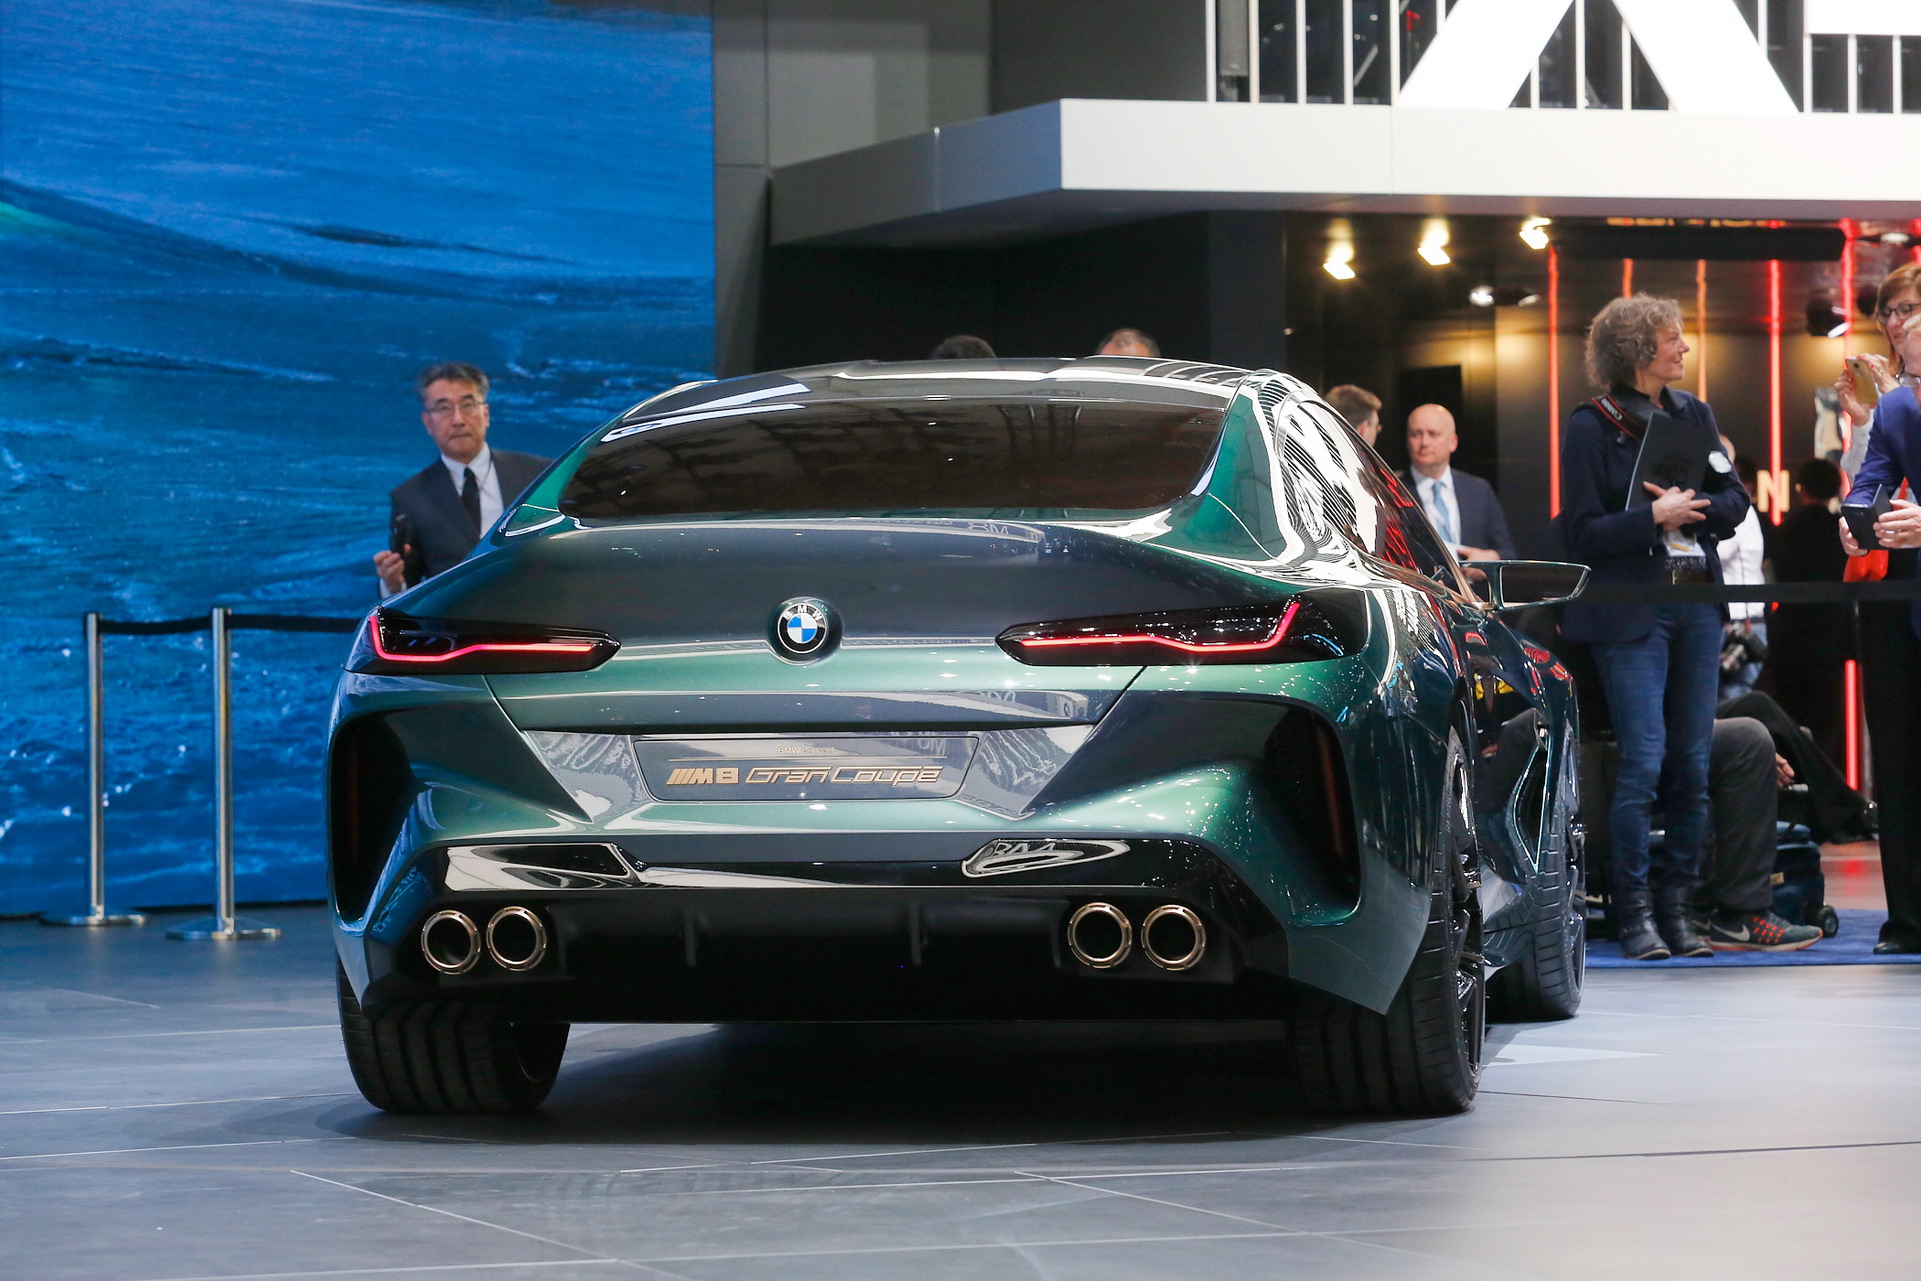 Bmw Concept M8 Gran Coupe Goes After Mercedes Amg Gt 4 Door Carscoops